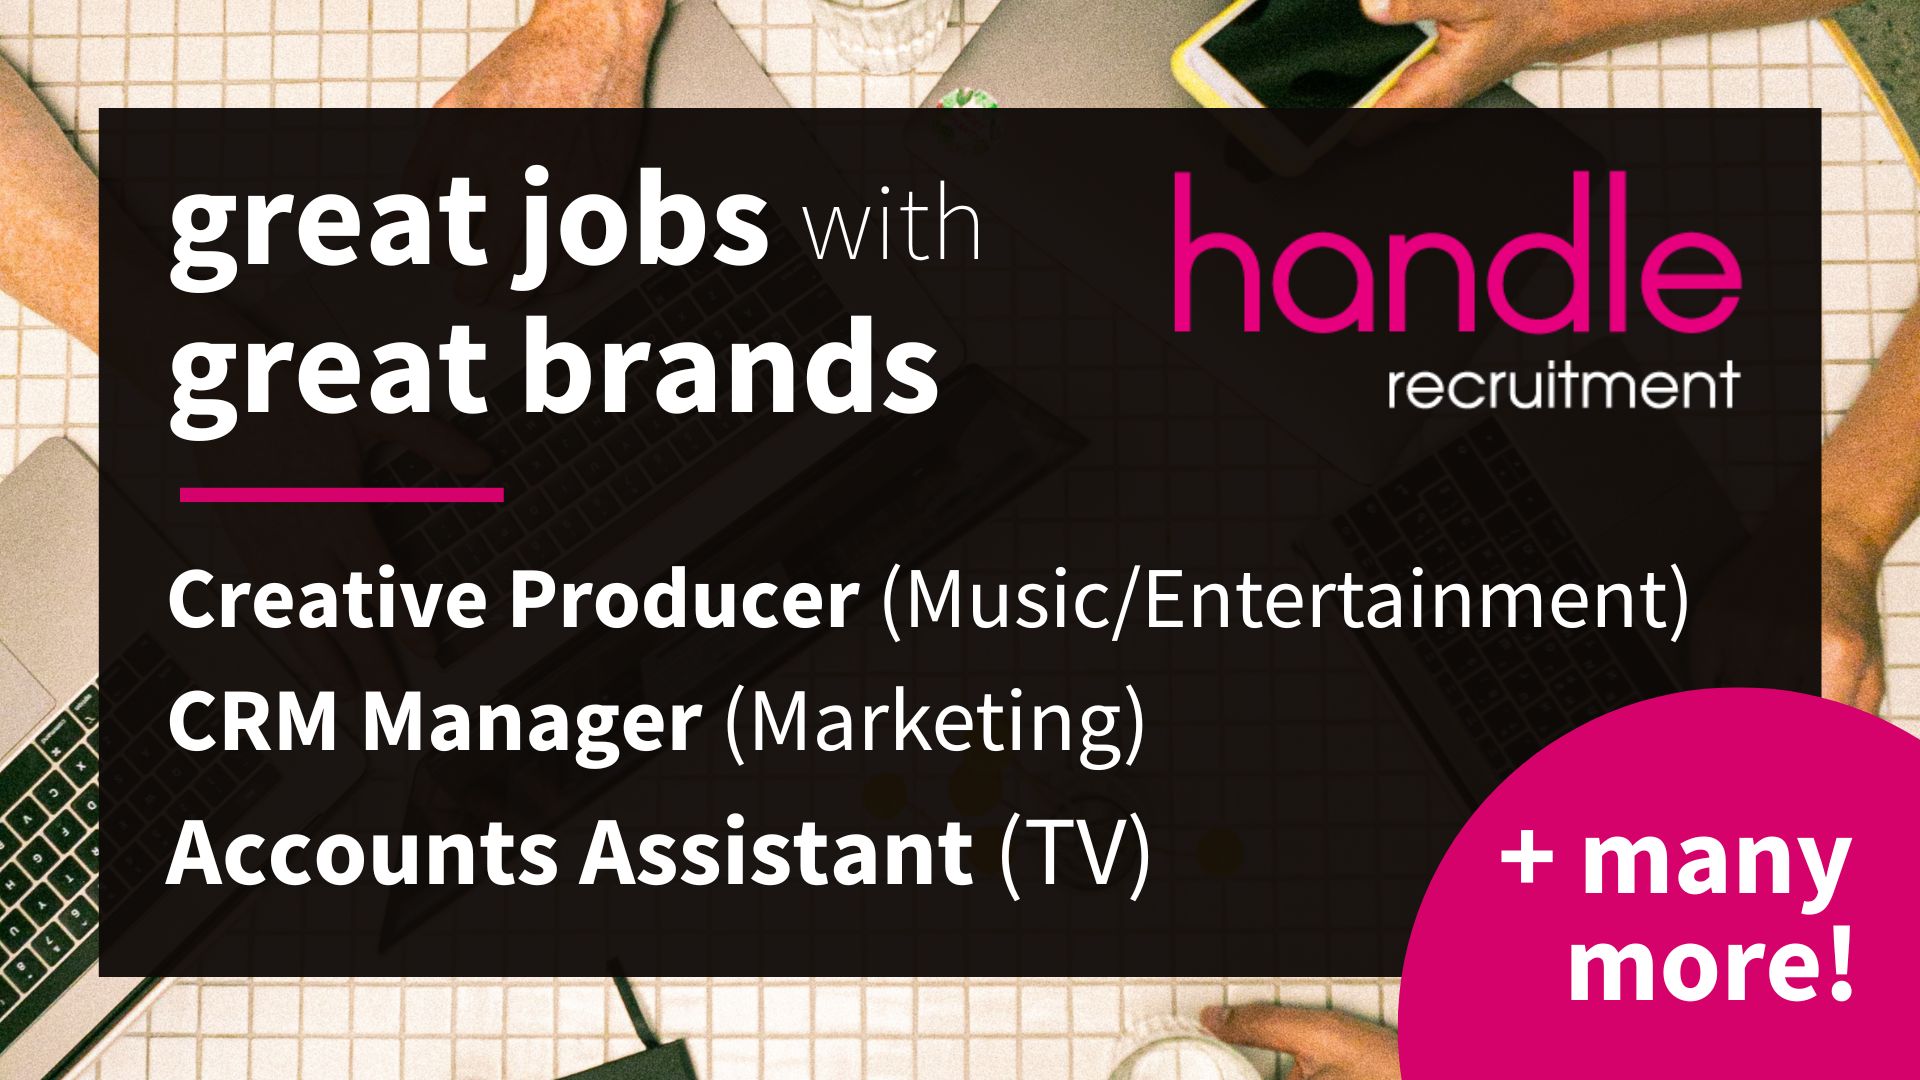 Great jobs with Great brands in London - 02/08/22